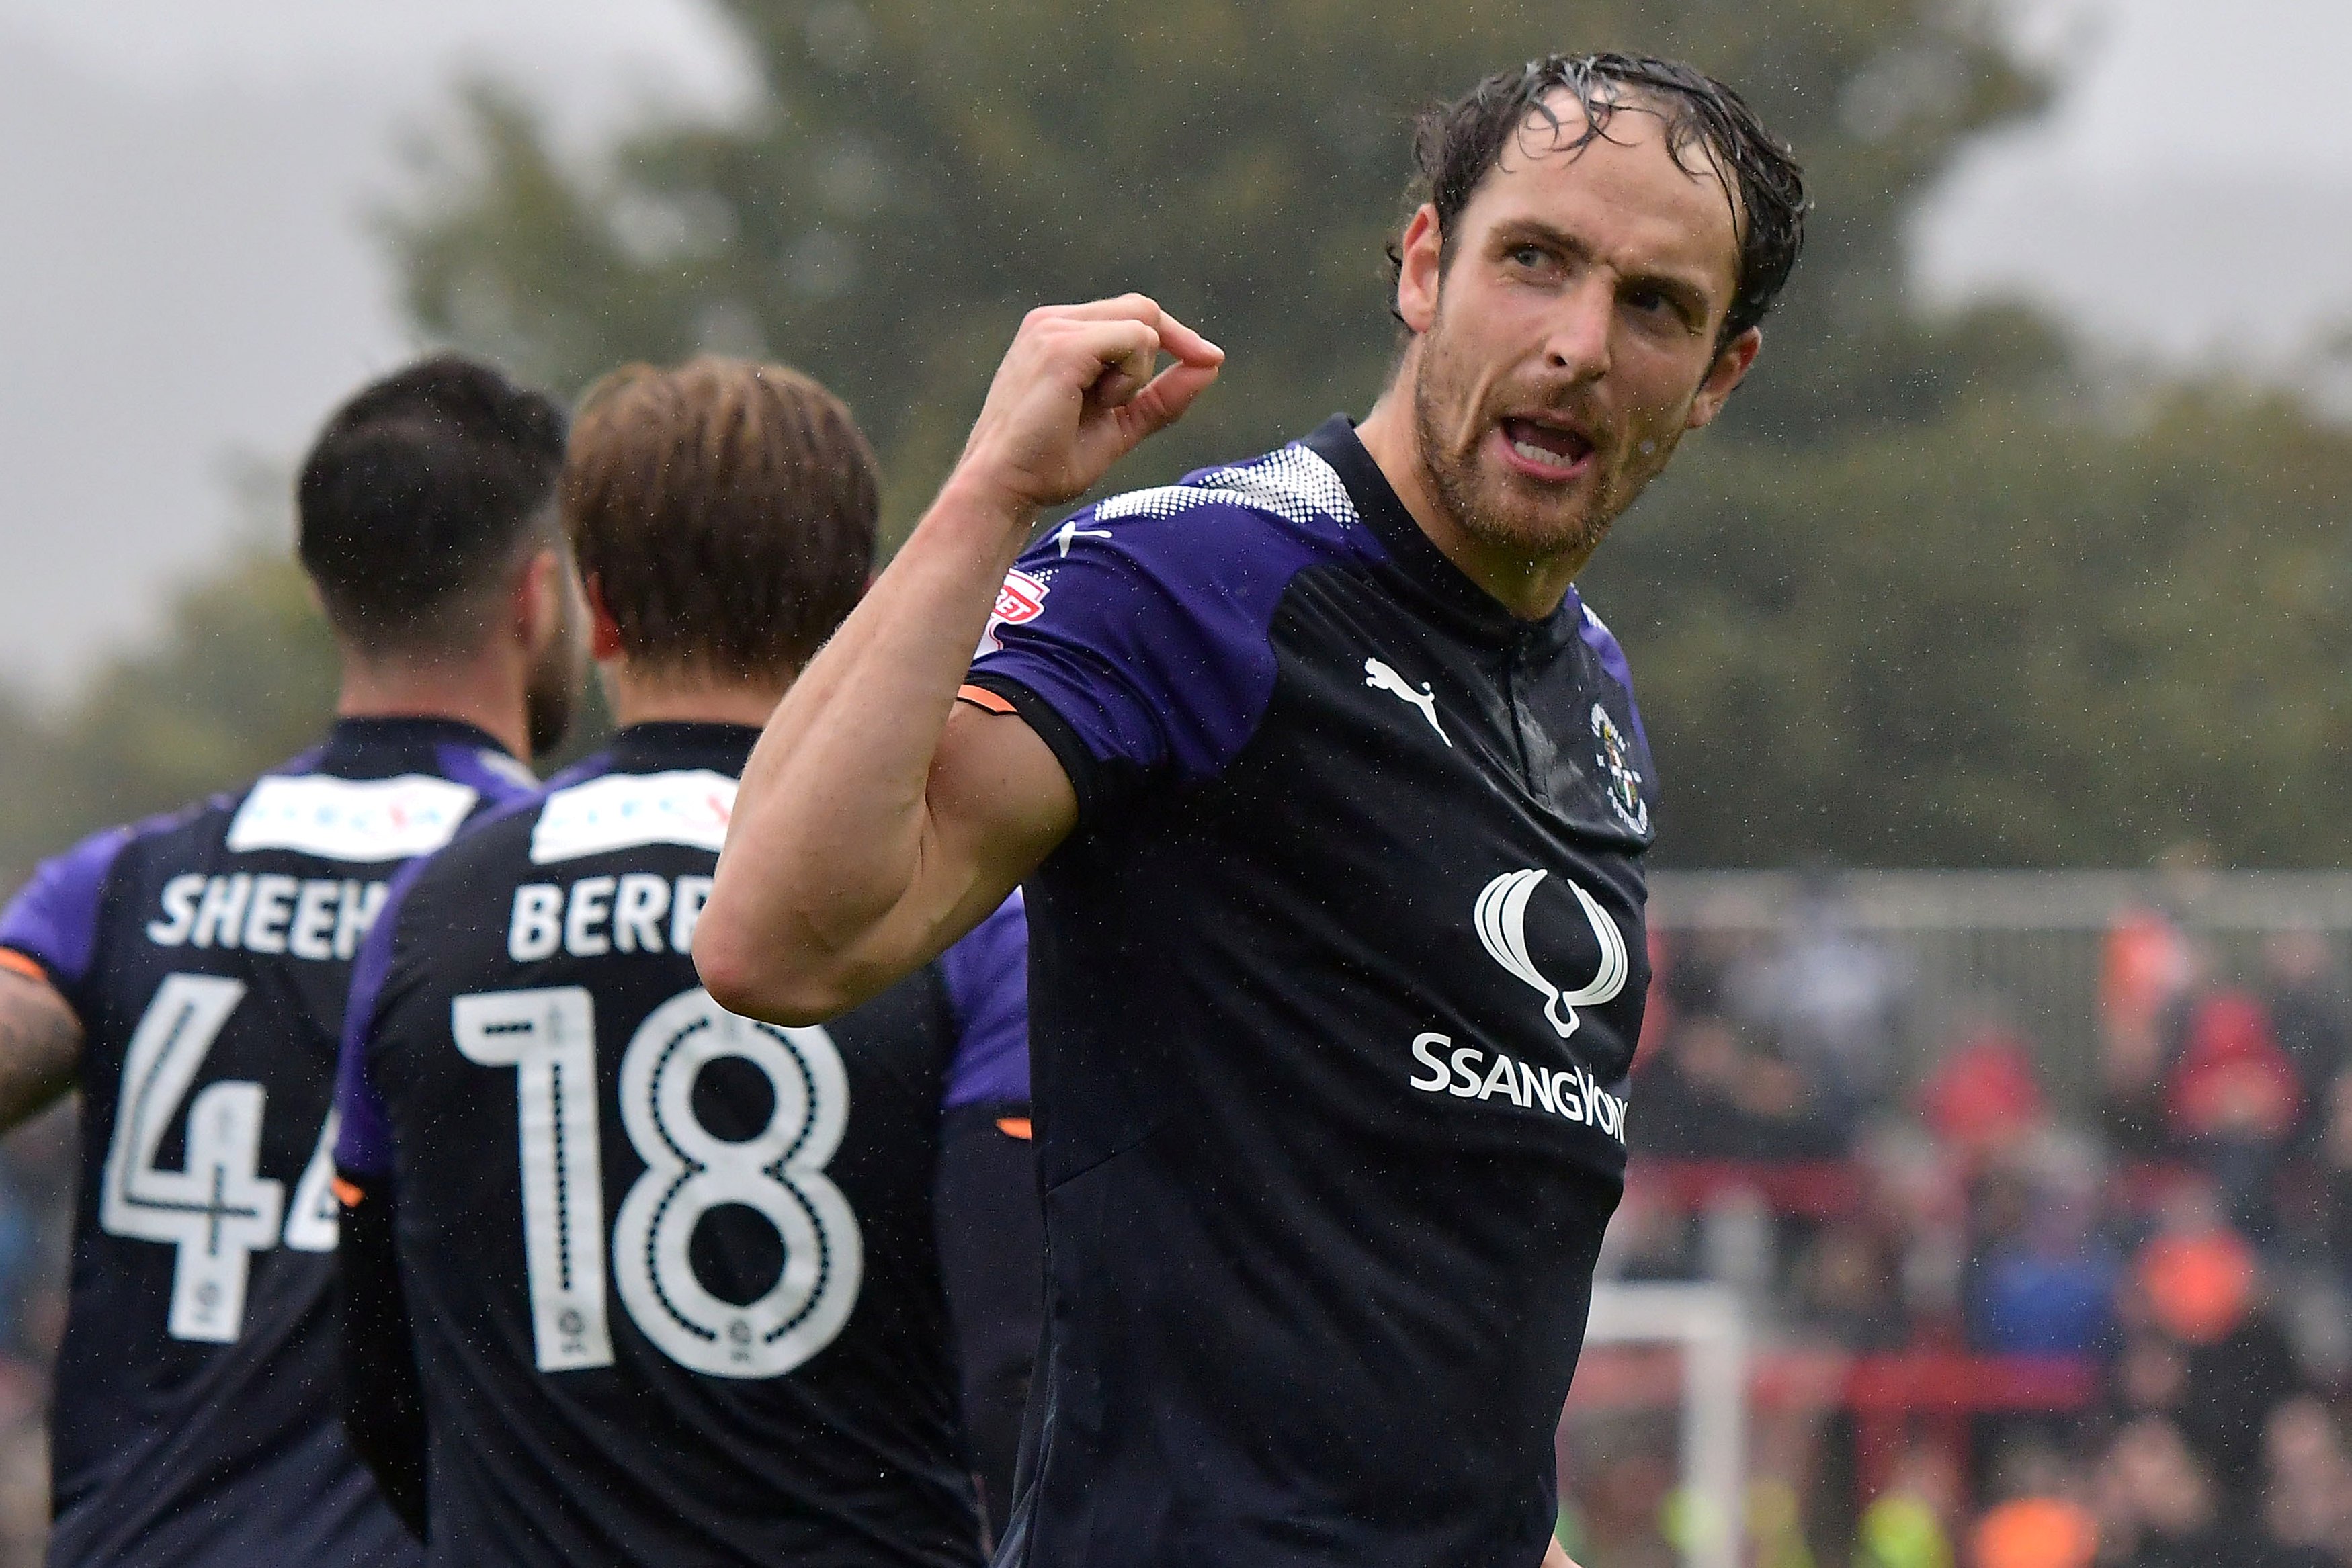 Danny Hylton - Fronting Luton Town, the Football League's high scorers